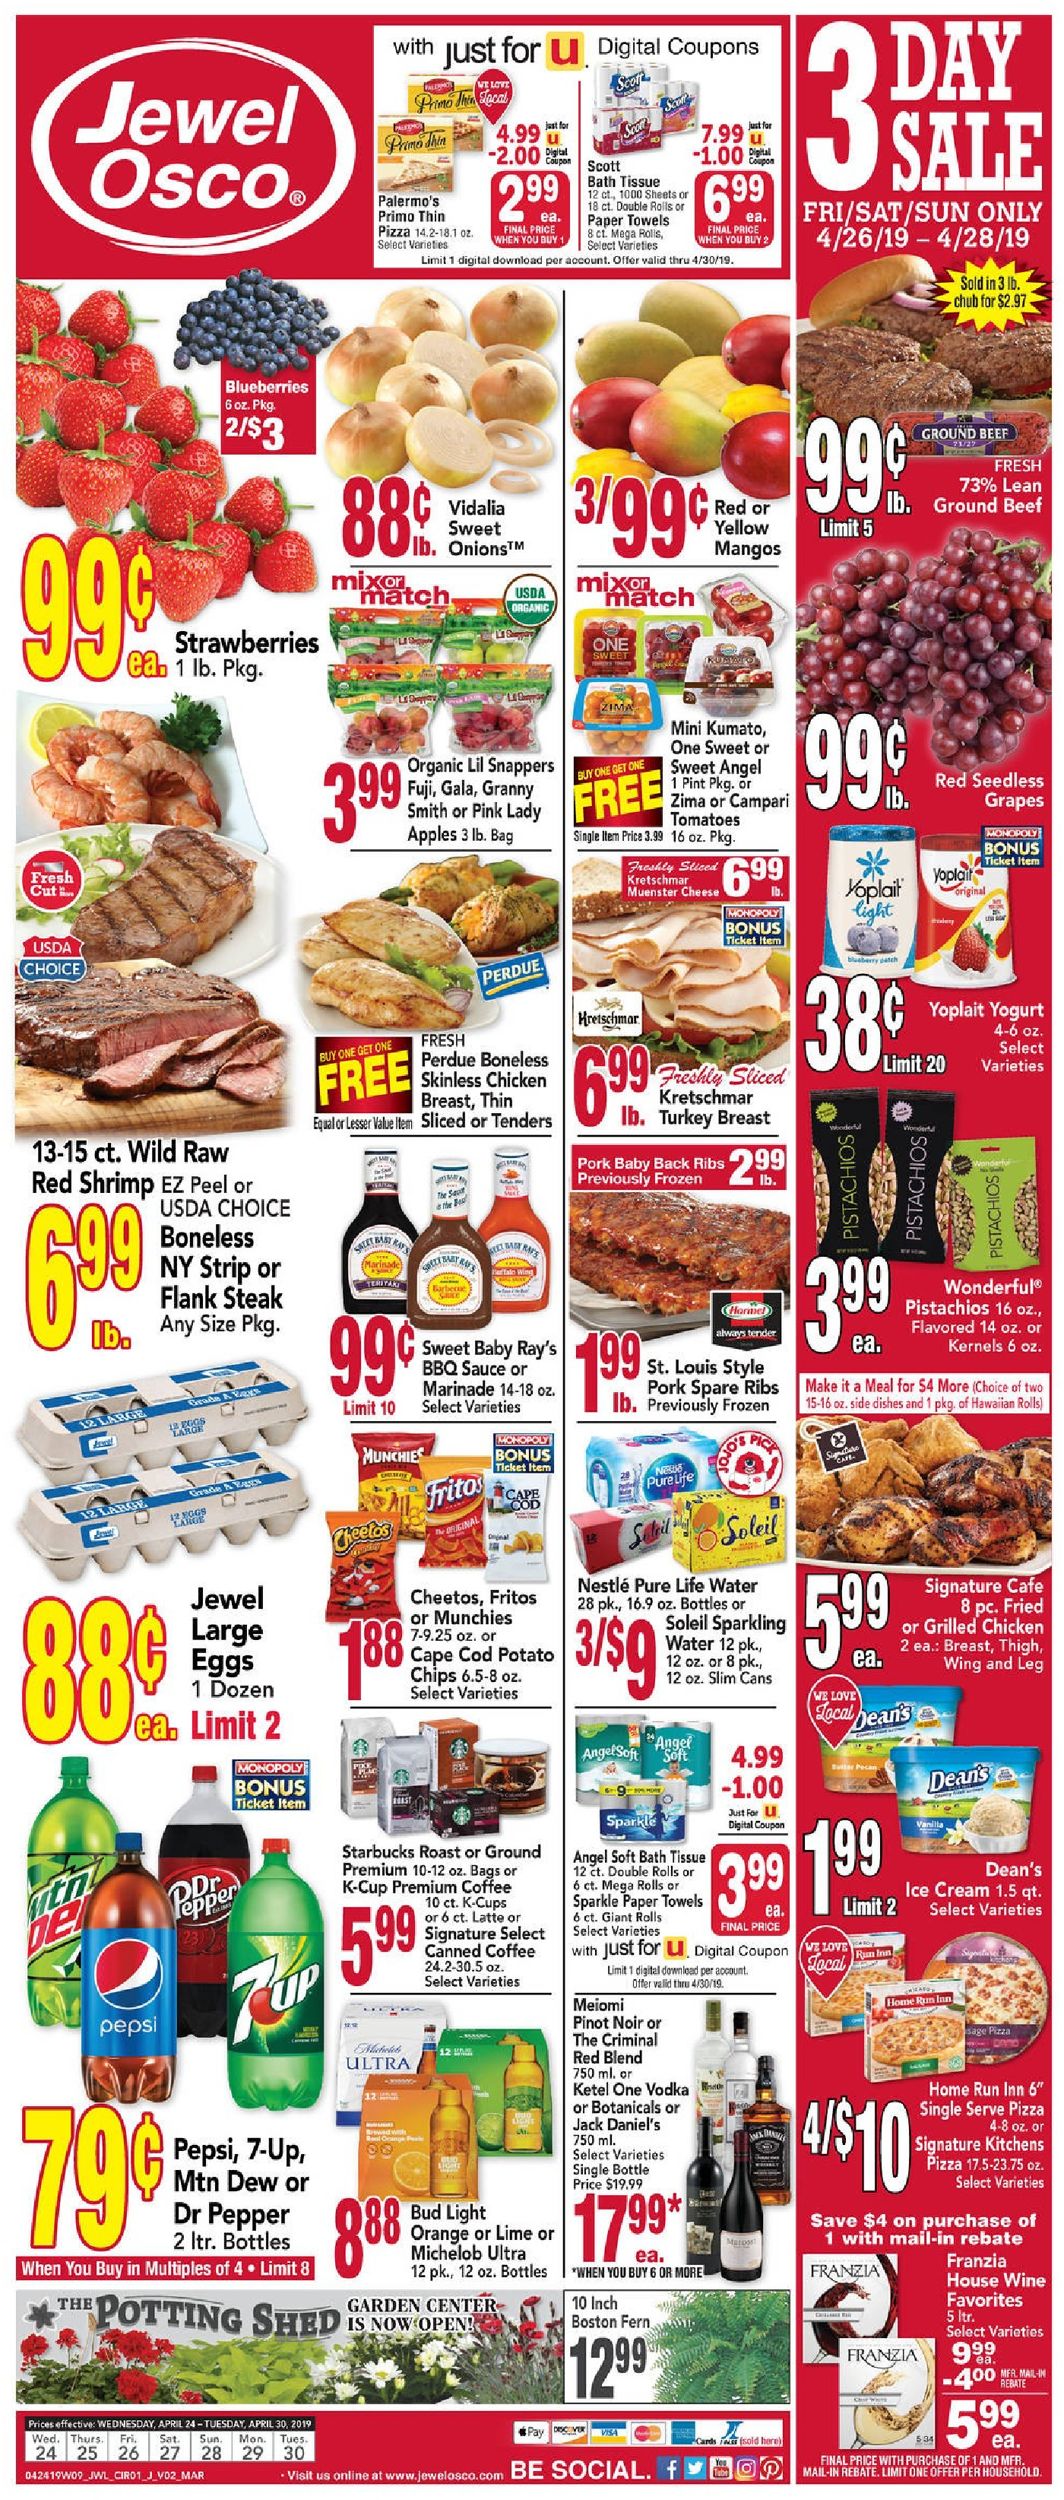 Jewel Osco Current weekly ad 04/24 - 04/30/2019 - frequent-ads.com 